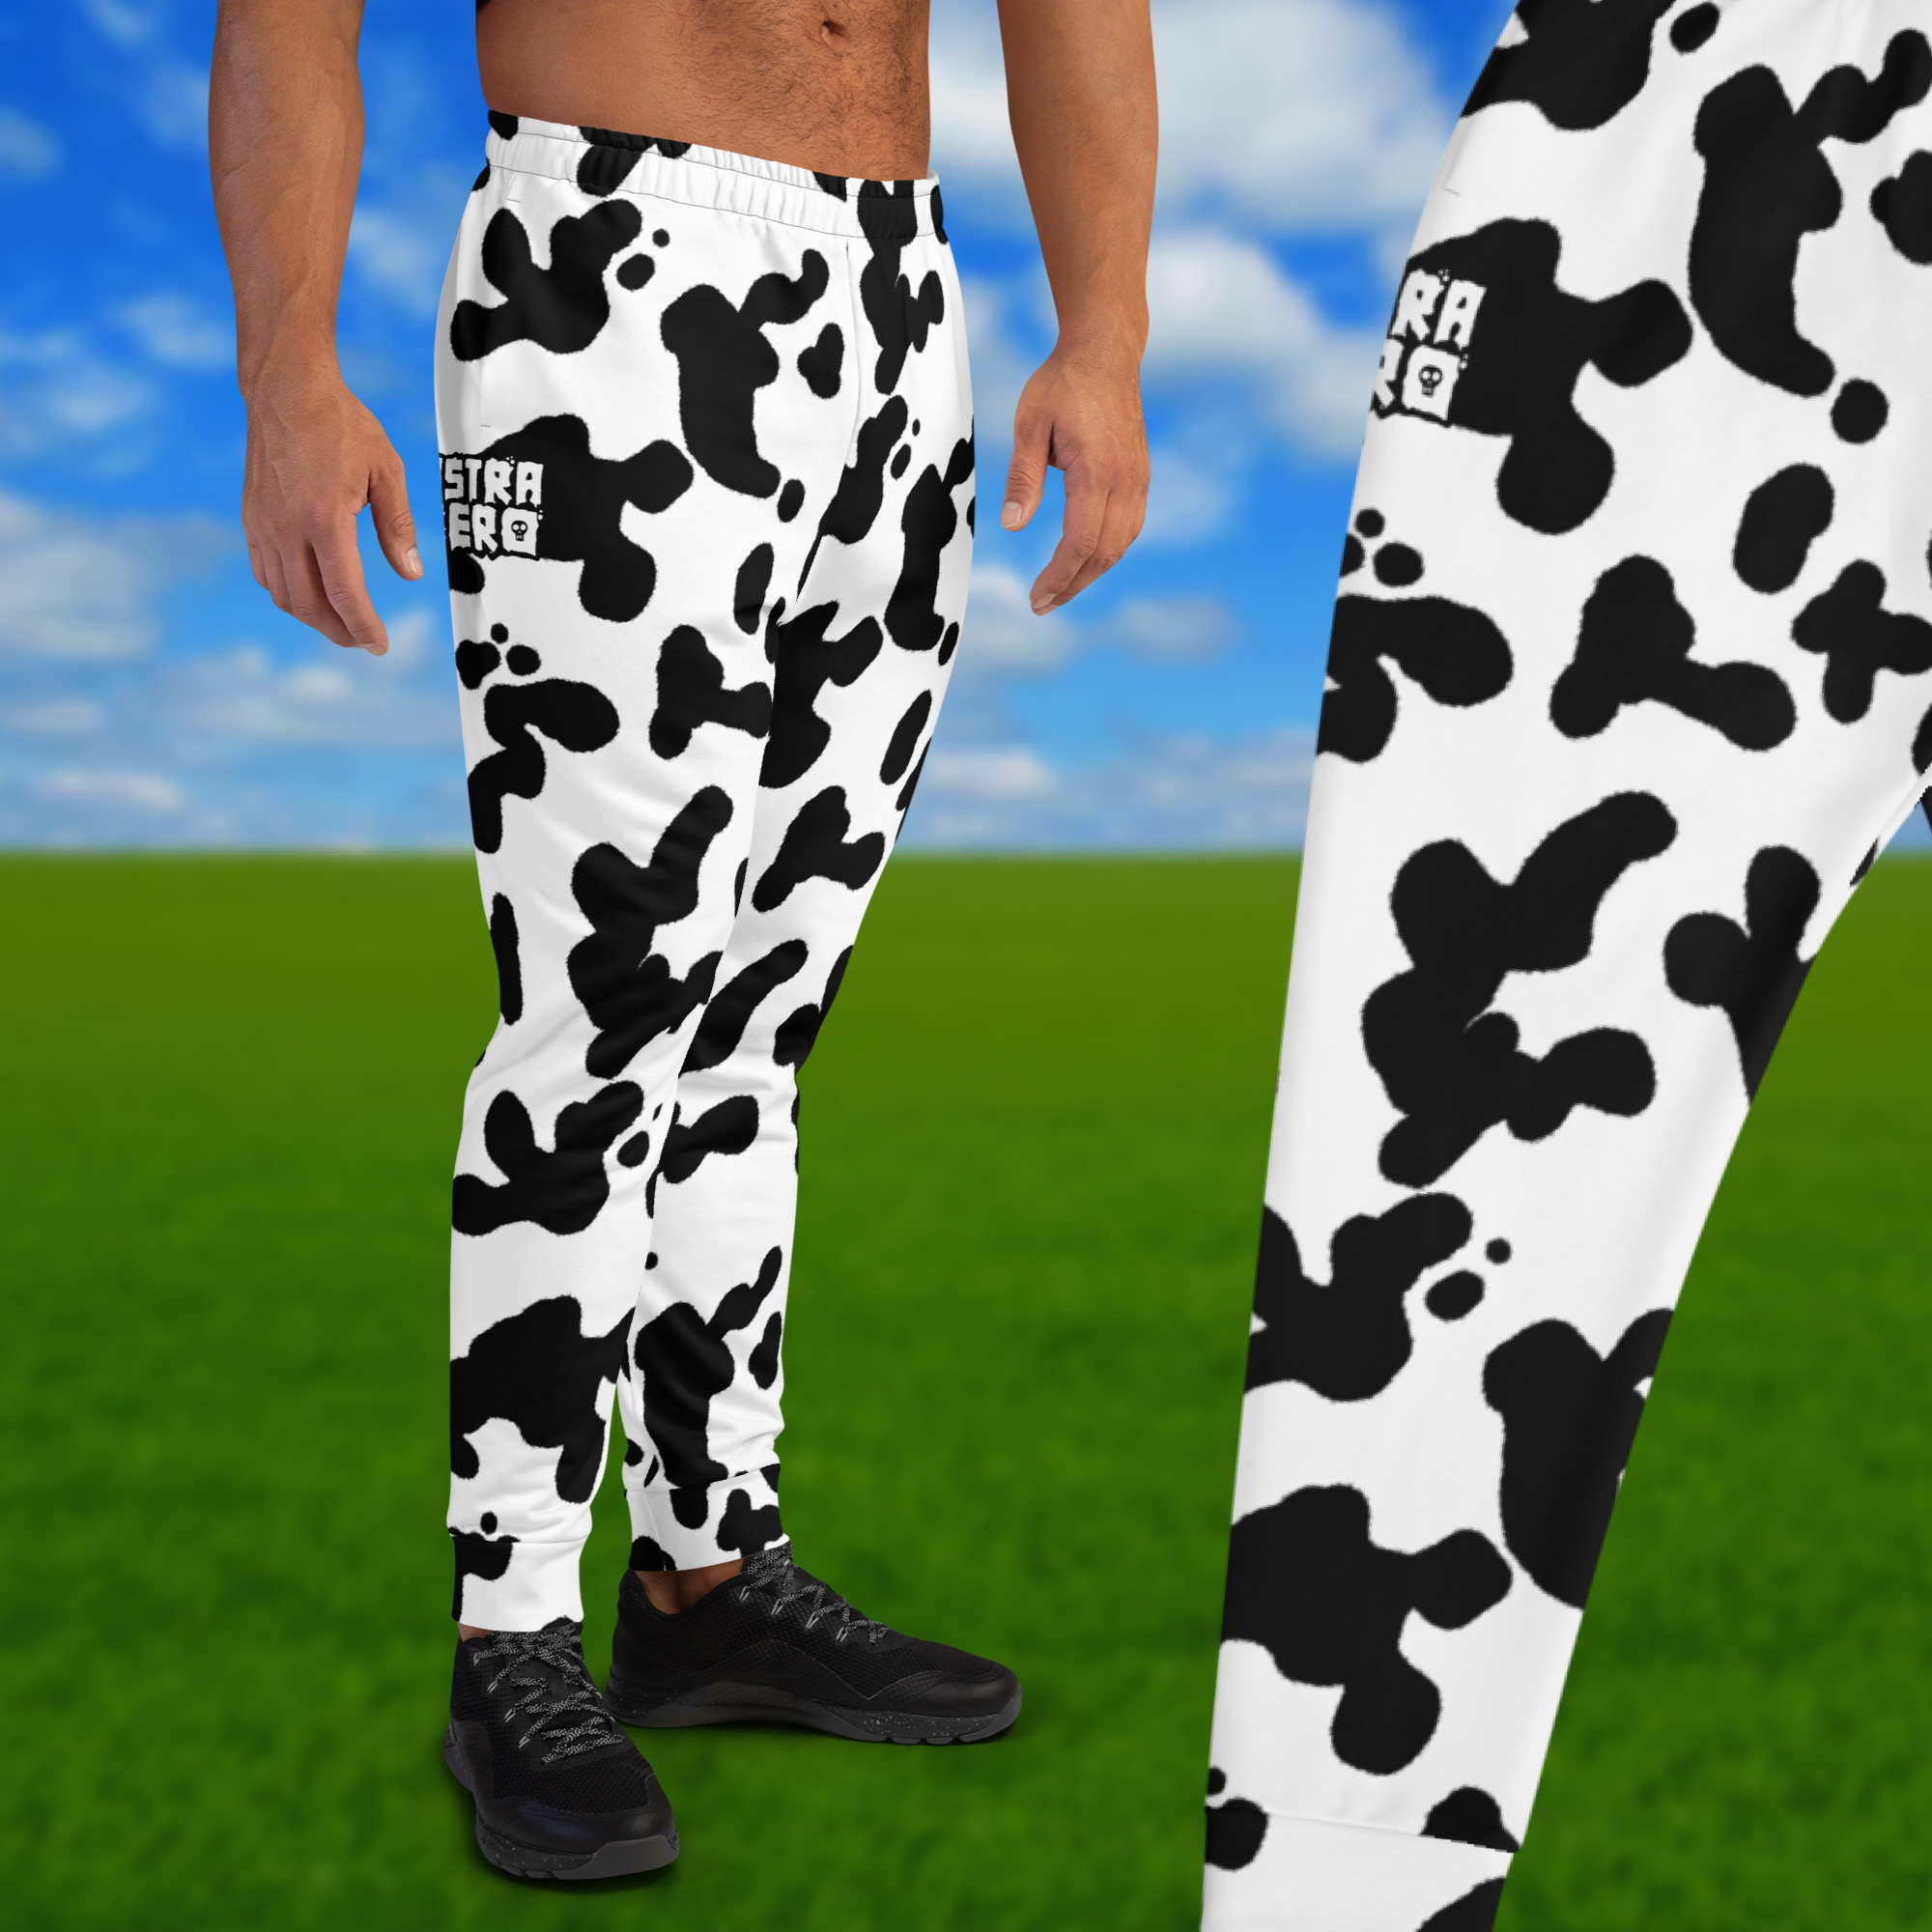 Featured image for “Astra Zero Cow - Men's Joggers”